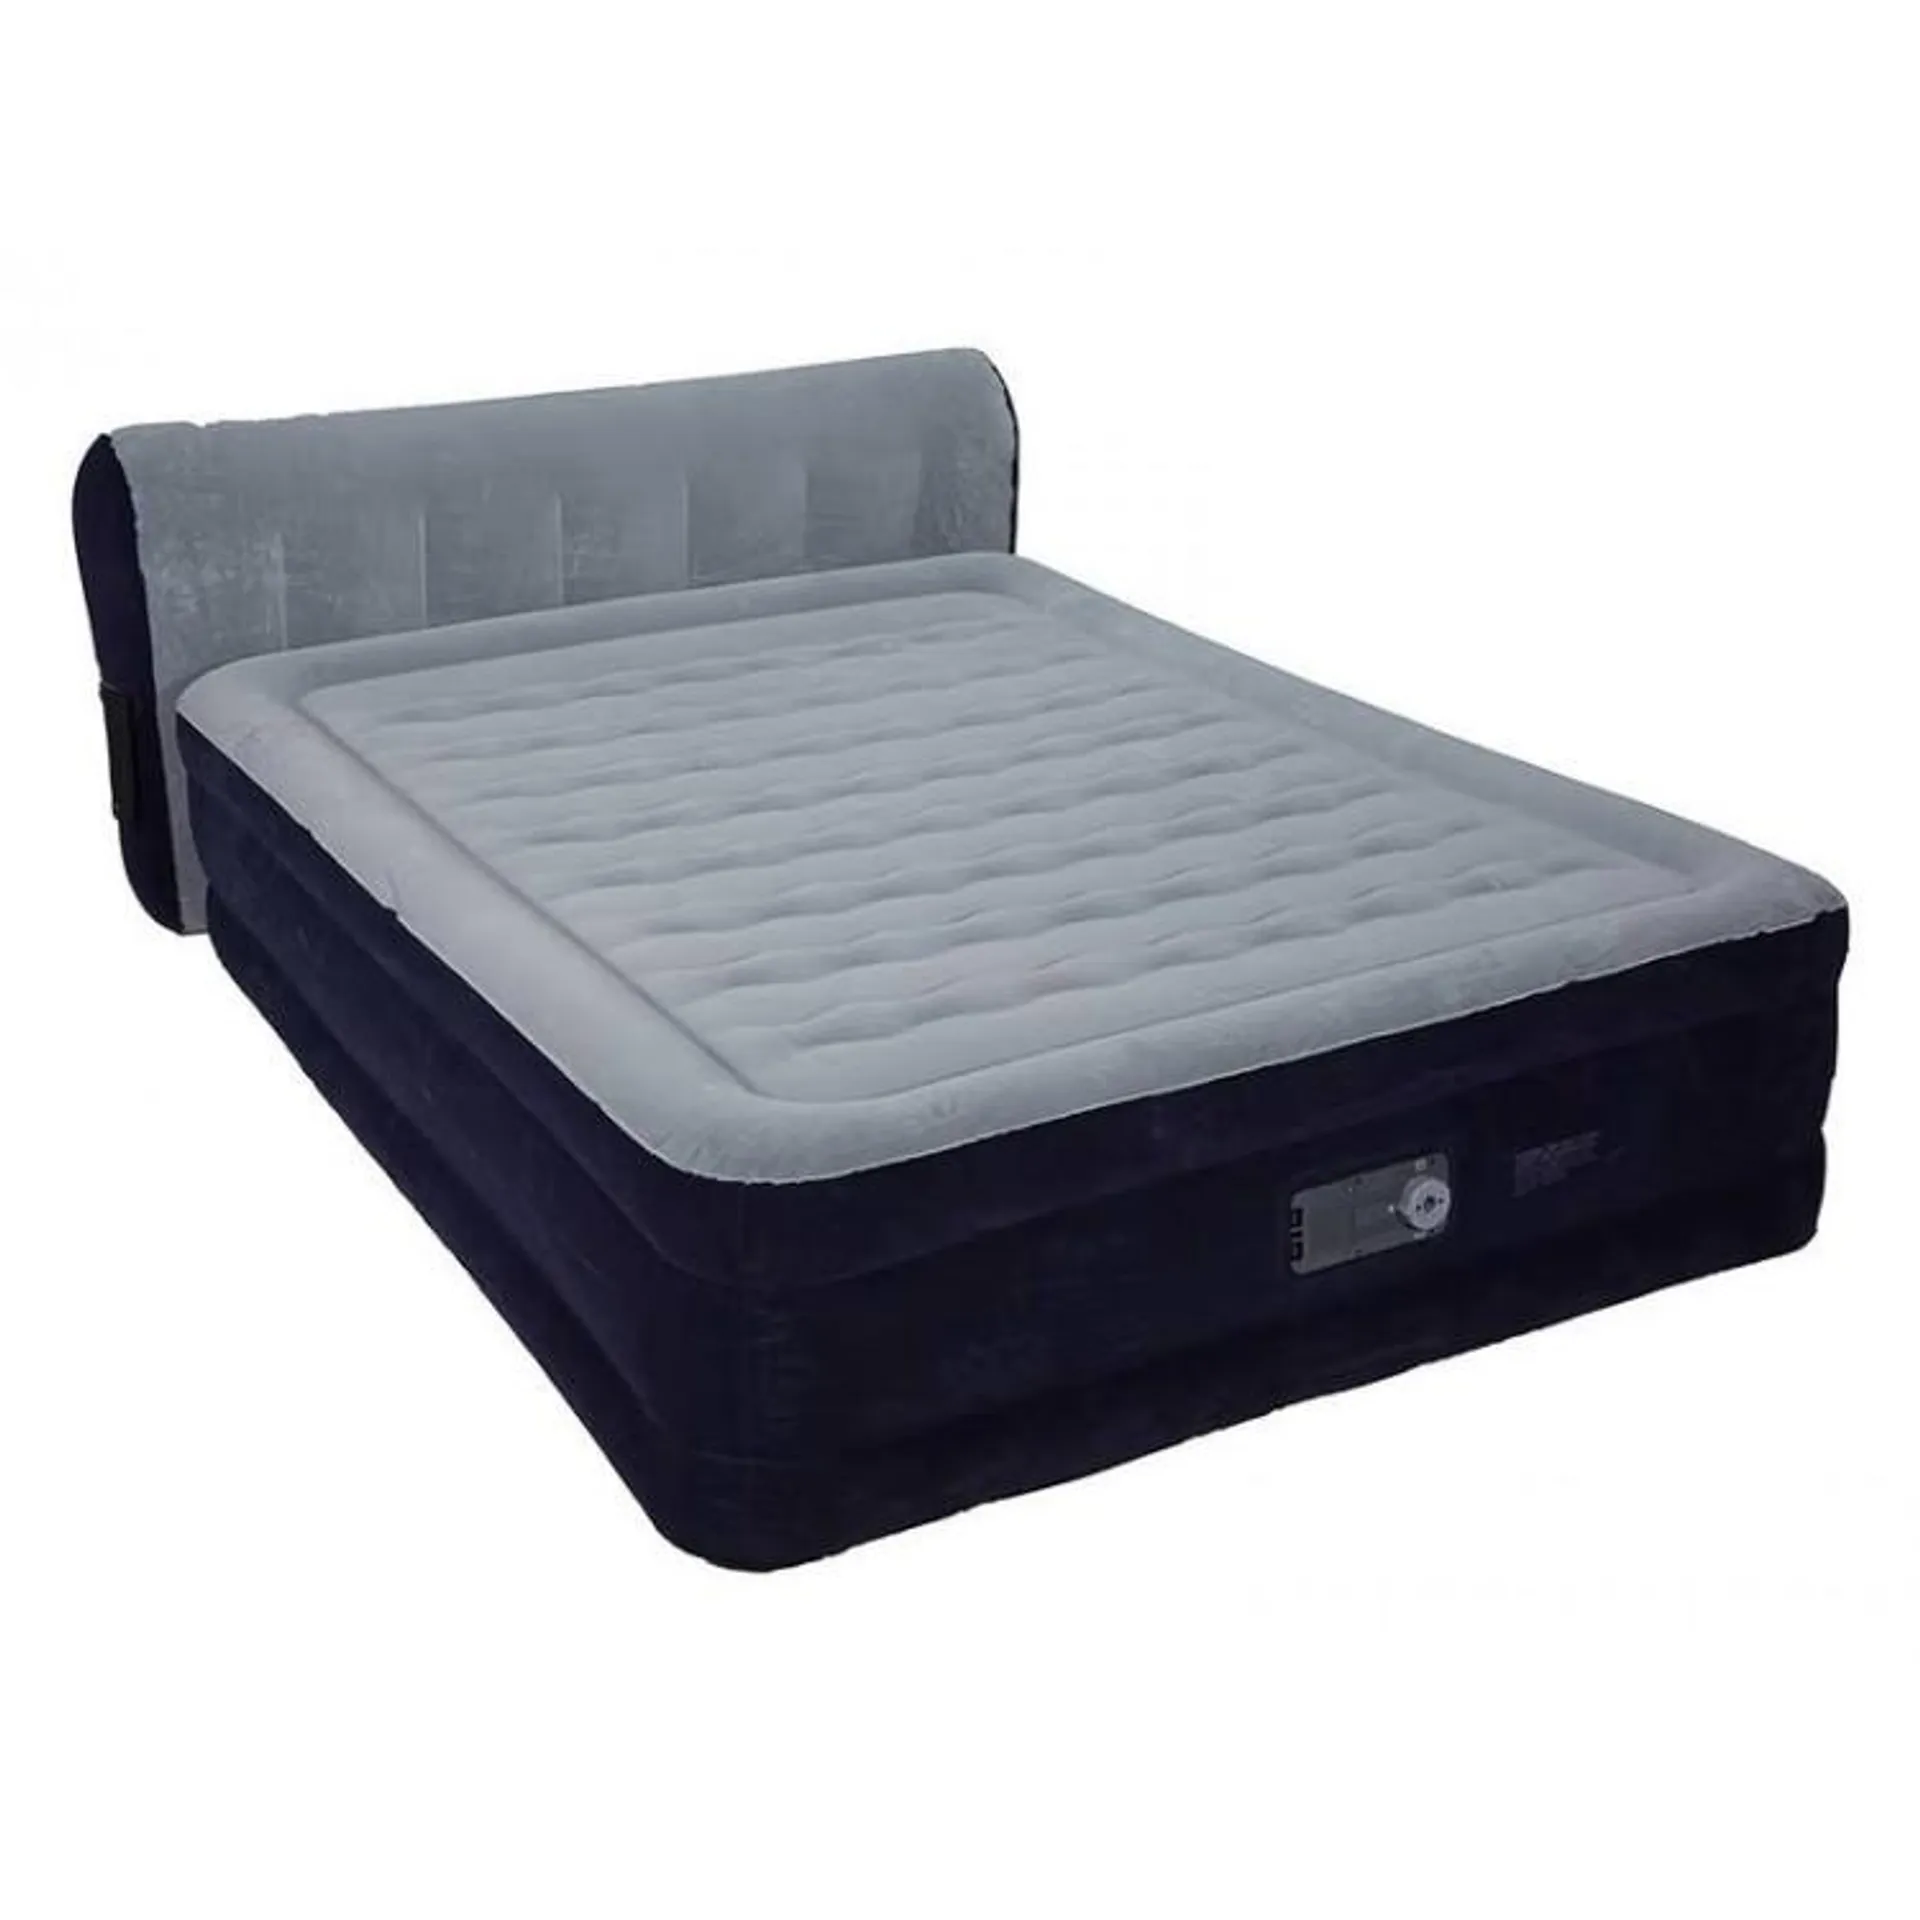 Queen Size Inflatable Air Bed with Built-In Pump & Backrest